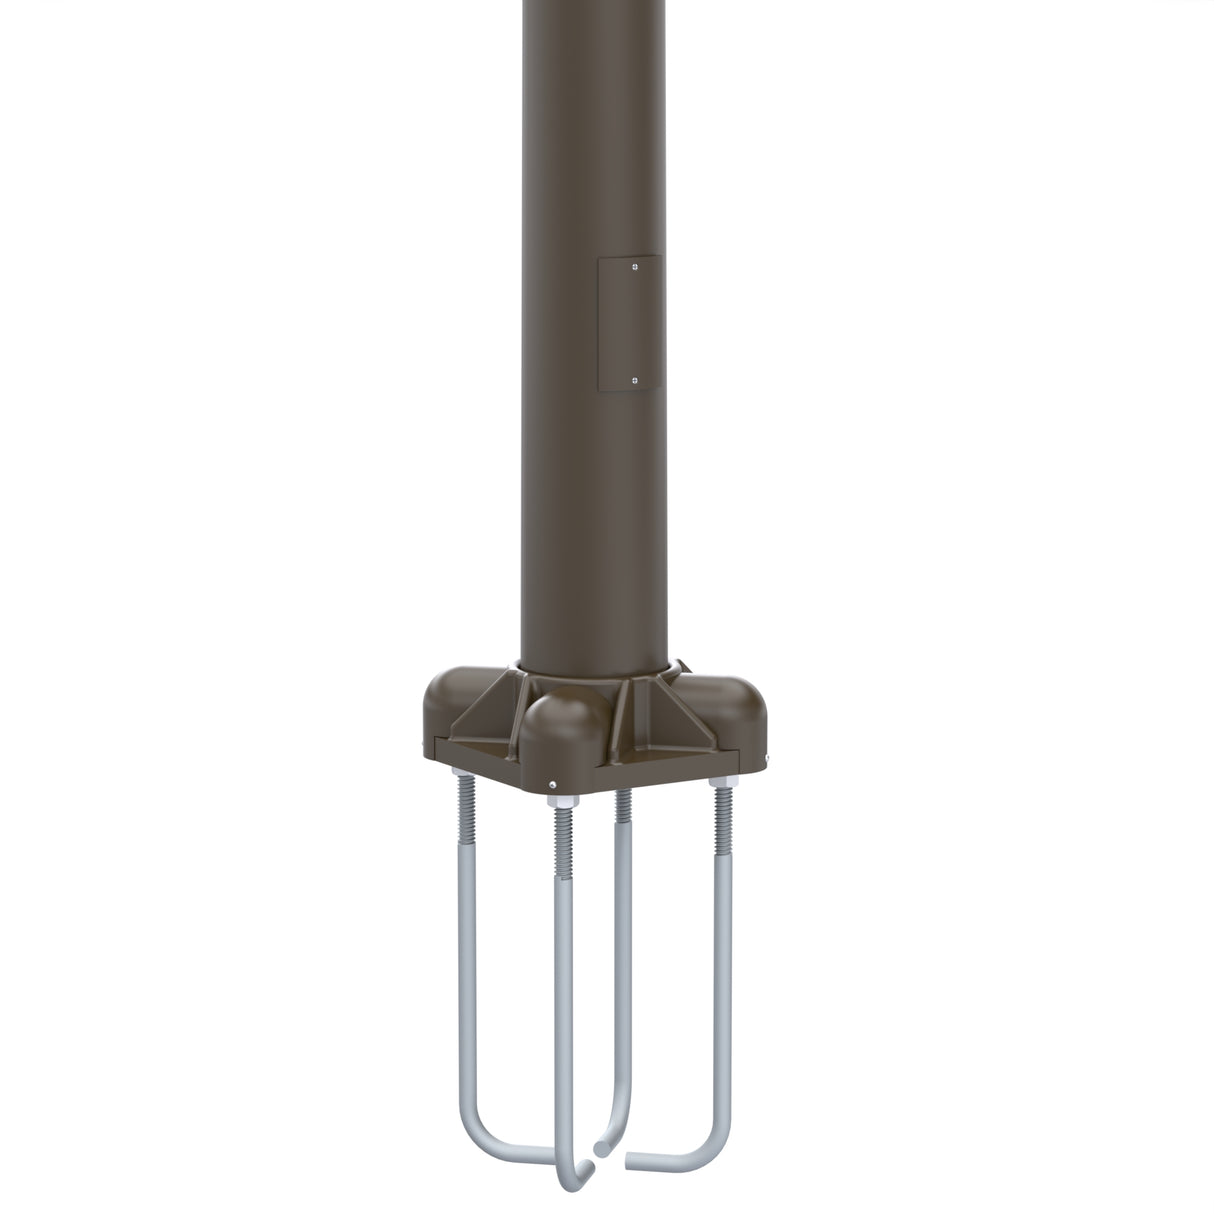 16' Tall x 6.0" Base OD x 4.0" Top OD x 0.188" Thick, Round Tapered Aluminum, Anchor Base Light Pole